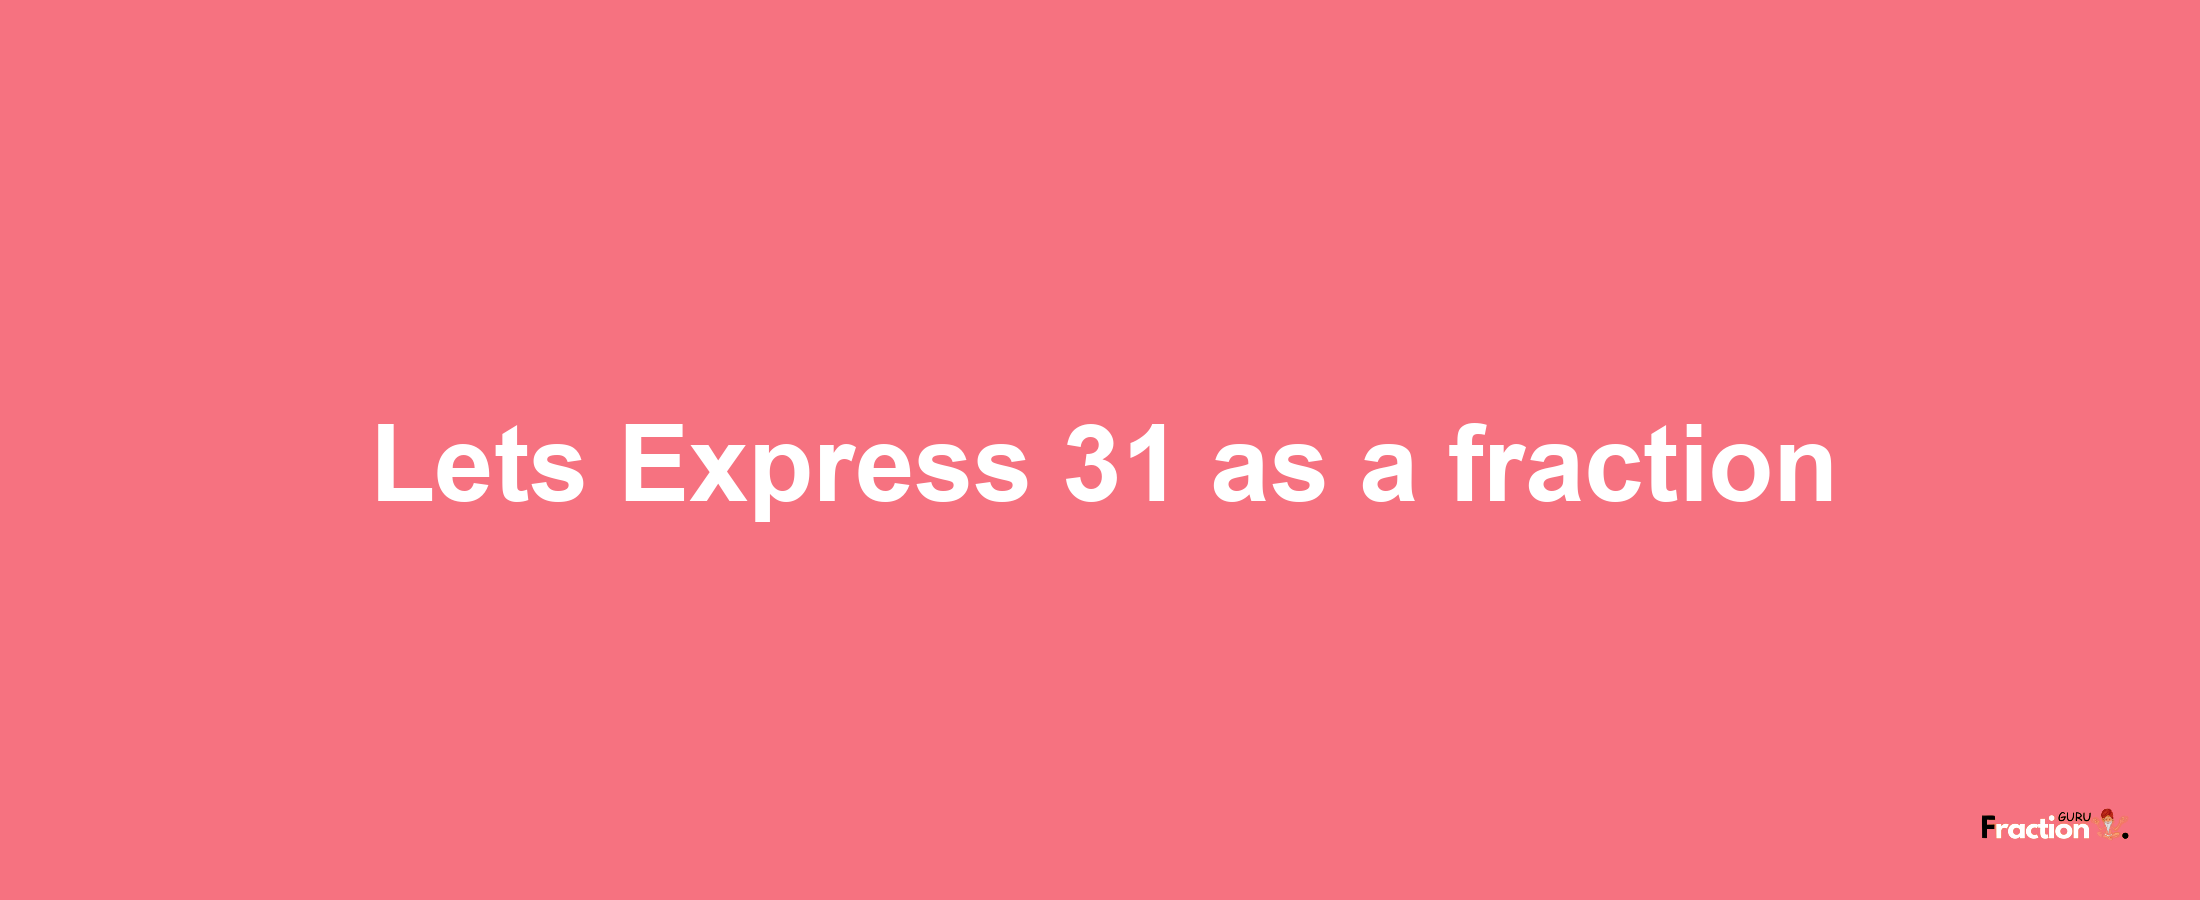 Lets Express 31 as afraction